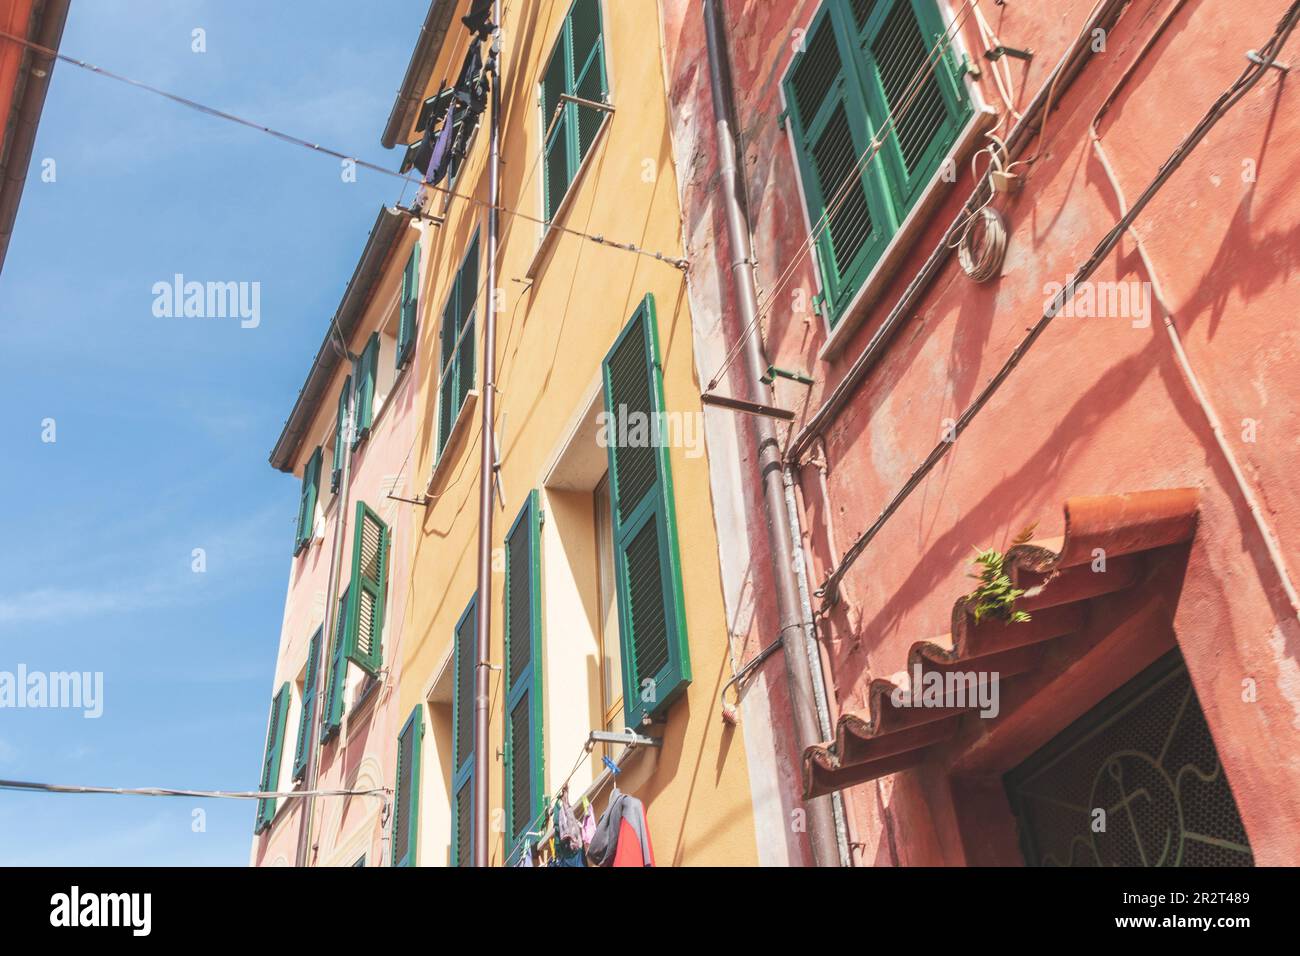 Low angle view of traditional Ligurian houses facades. Lerici, Italy. Copy space Stock Photo